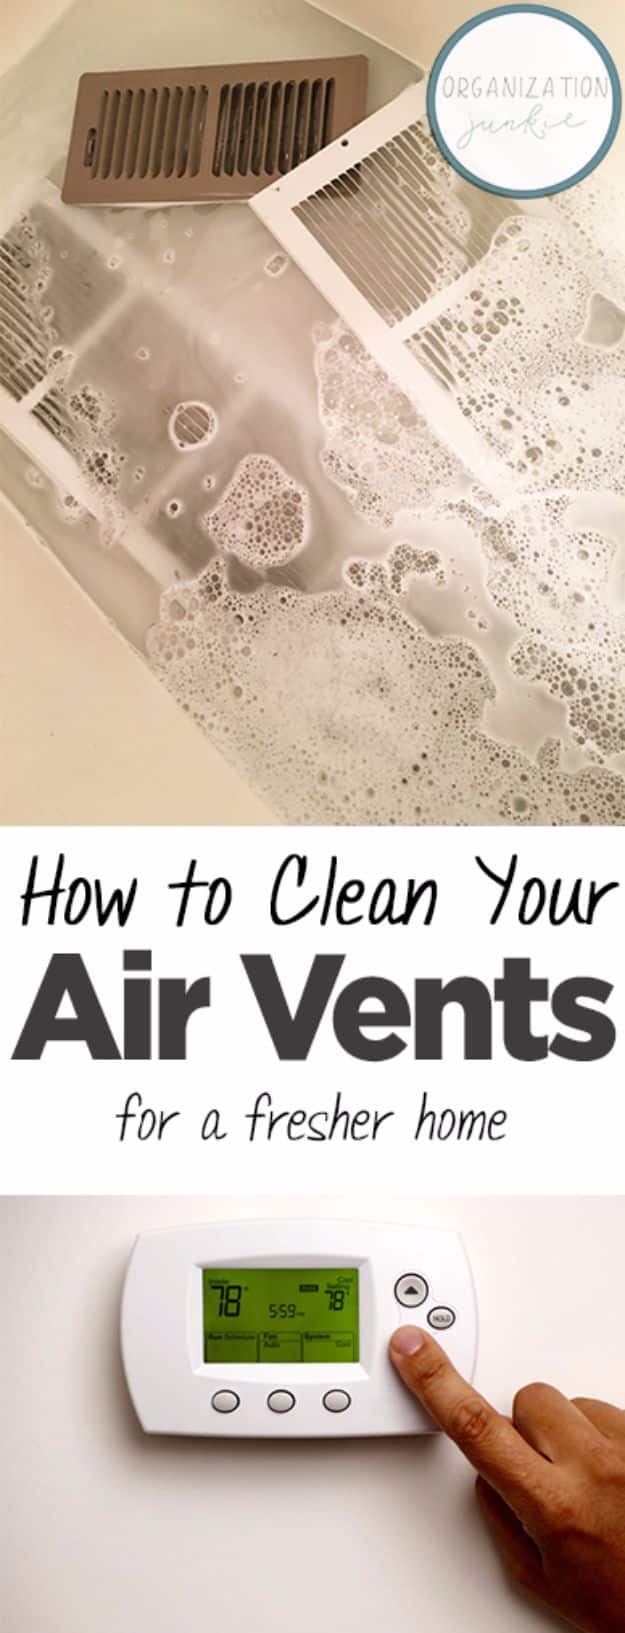 Best Spring Cleaning Ideas - Clean Your Air Vents For A Fresher Home - Easy Cleaning Tips For Home - DIY Cleaning Hacks and Product Recipes - Tips and Tricks for Cleaning the Bathroom, Kitchen, Floors and Countertops - Cheap Solutions for A Clean House #springcleaning